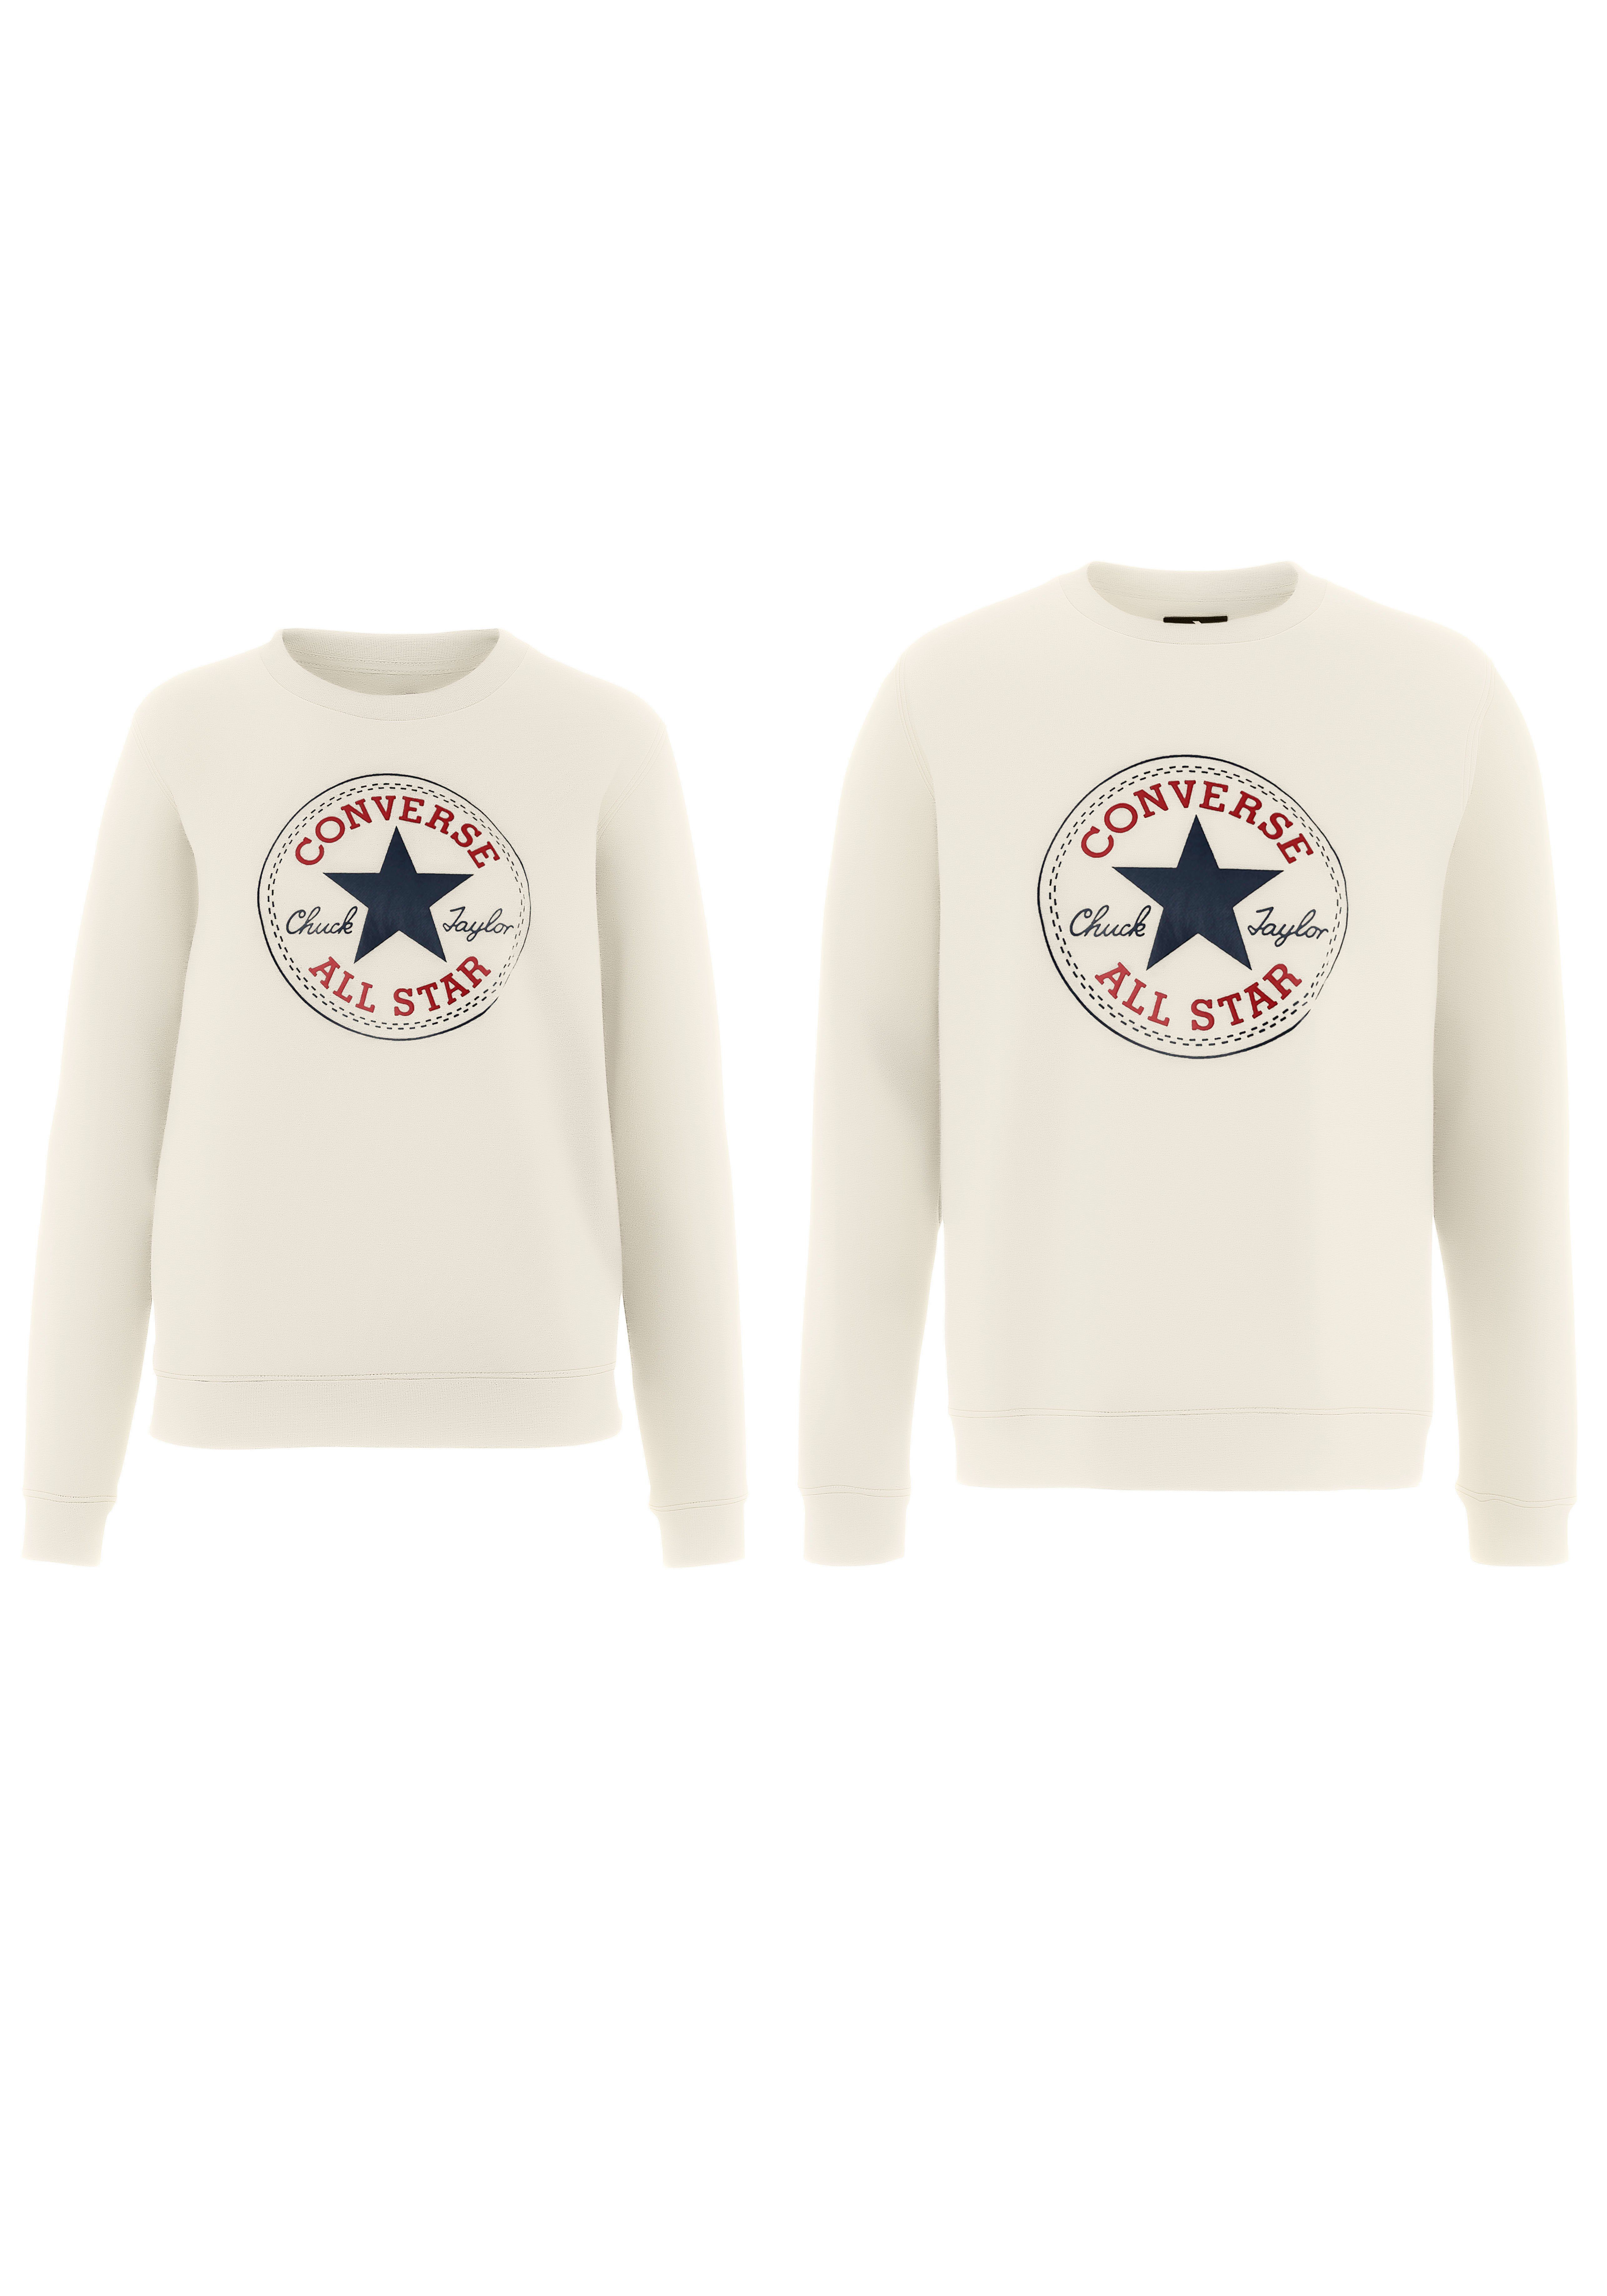 BACK Converse BRUSHED EGR PATCH UNISEX STAR Sweatshirt ALL